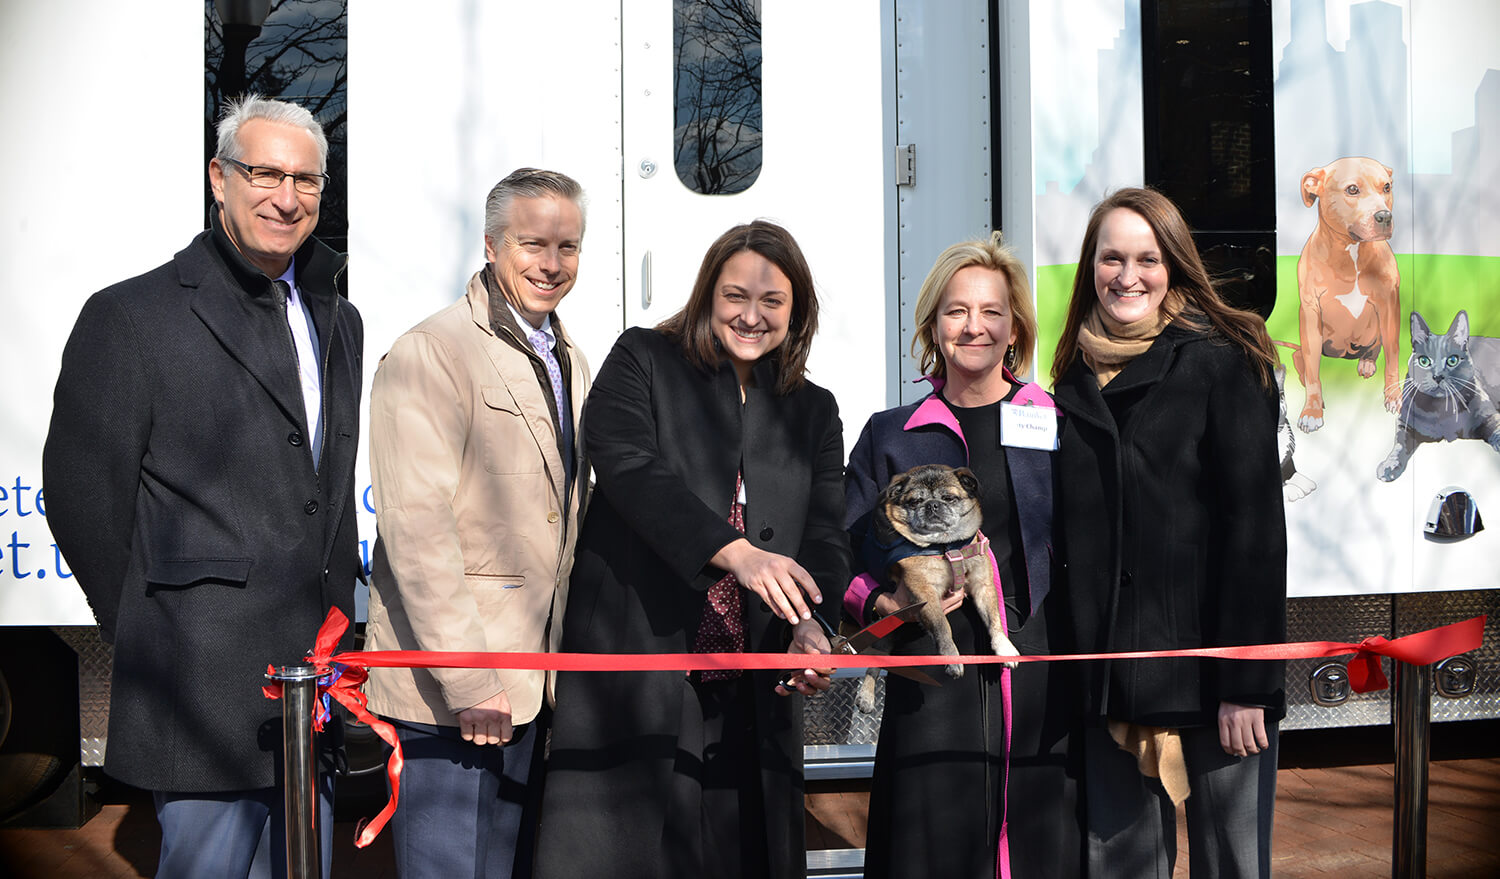 A celebratory ribbon-cutting ceremony marked the unveiling of the Shelter Medicine mobile clinic, a culmination of a vision that Watson (center) and colleagues dreamed up five years ago. Joining her in the festivities were, from left, Penn Vet Dean Andrew Hoffman, David Haworth of PetSmart Charities, Katy Champ of the Bernice Barbour Foundation (with Tupug the dog), and Reinhard.